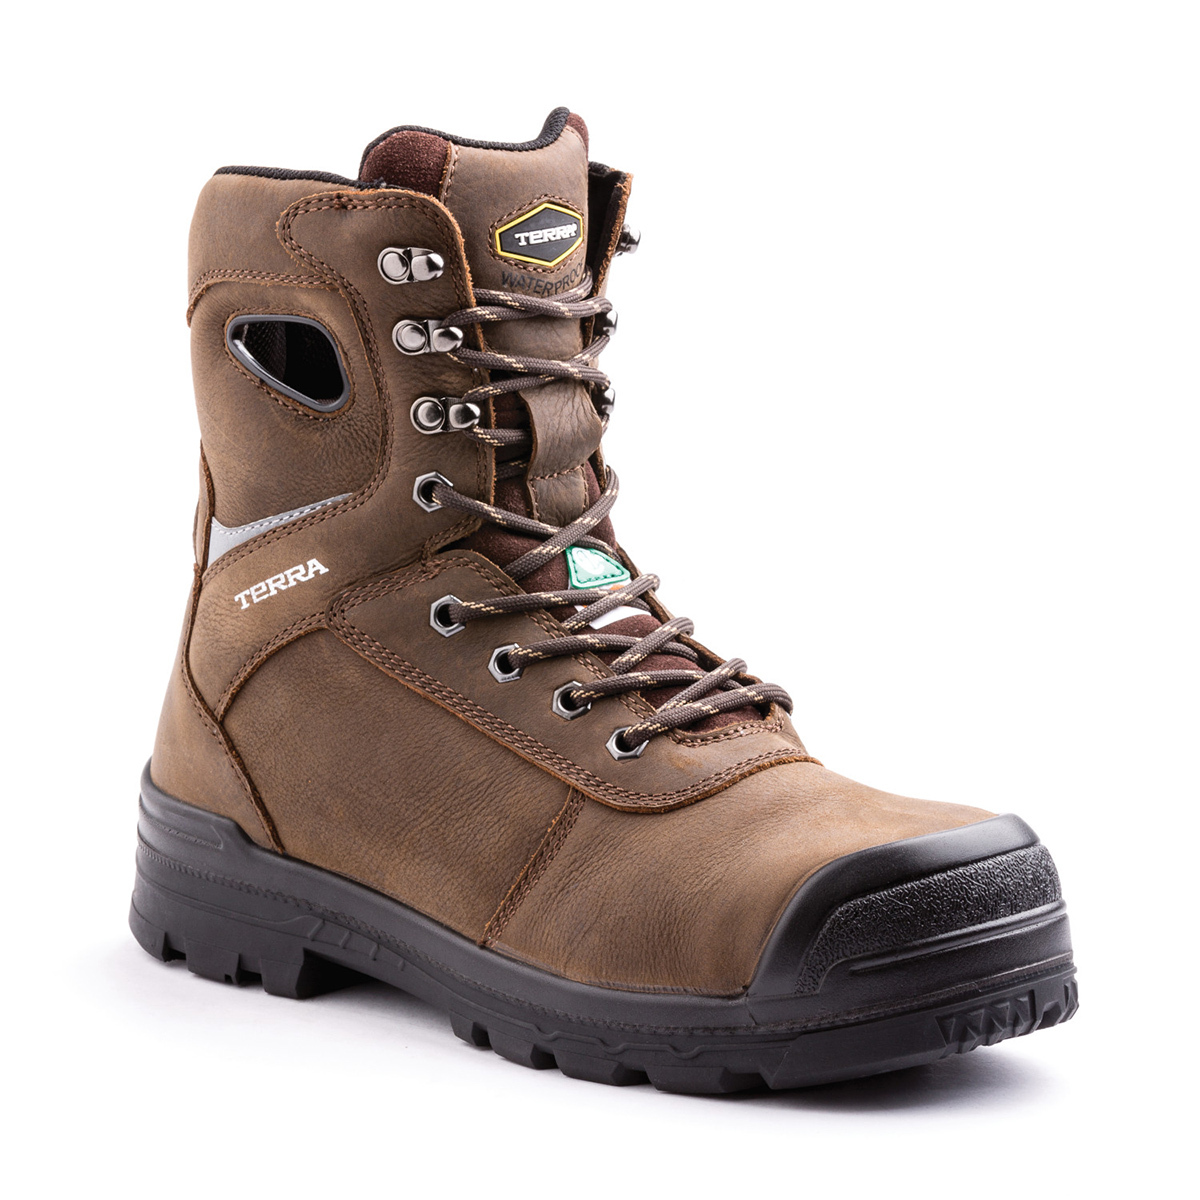 TERRA Size 9 1/2 Brown Pilot Leather Composite Toe Safety Boots With High Traction, Anti F.O.D. Slip Resistant Rubber Outsole